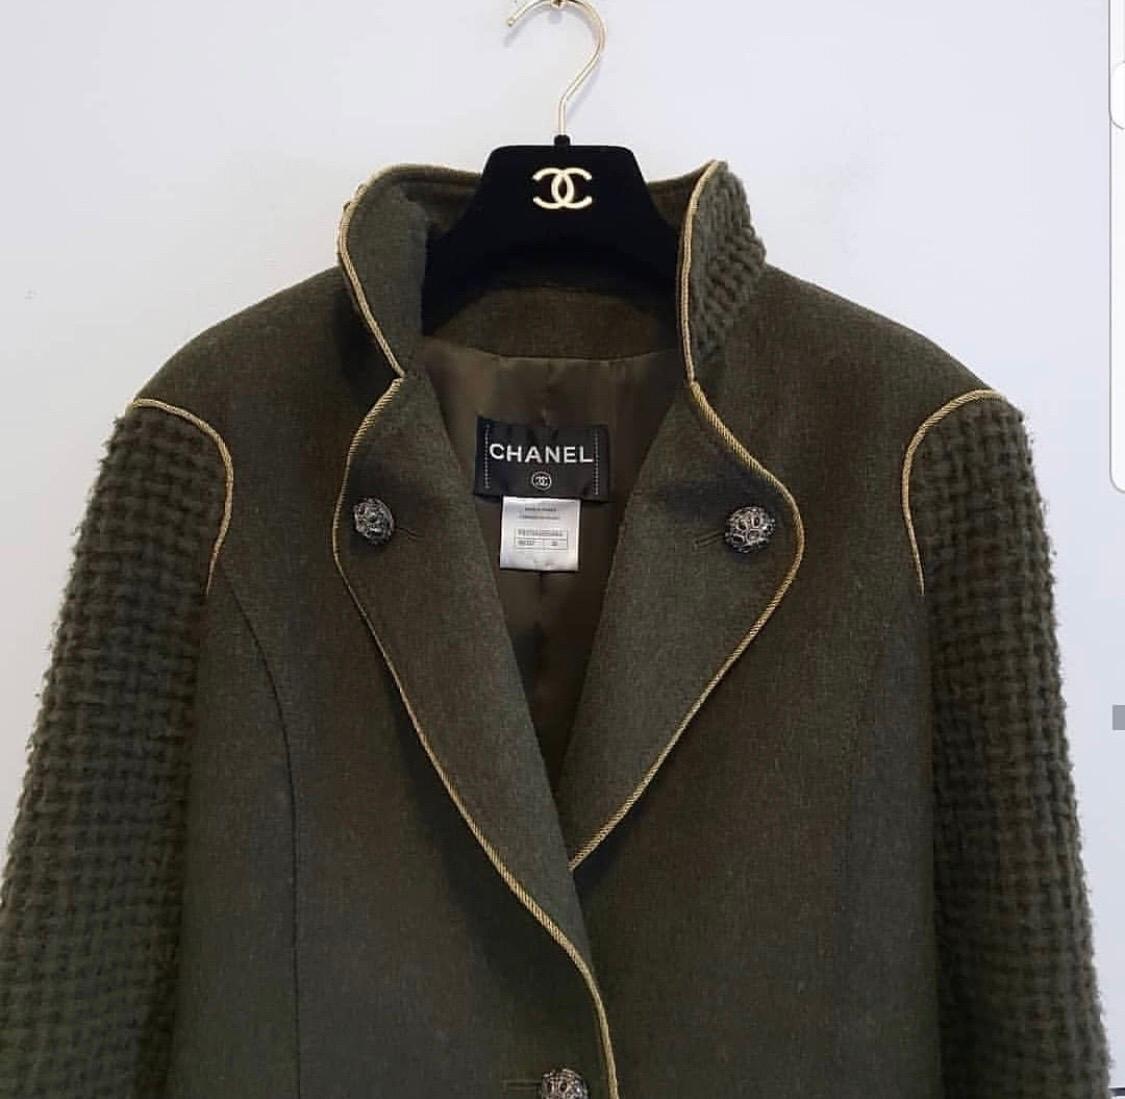 Chanel Paris - Salzburg Runway

Gorgeous coat.

size 40

Material: Wool

Condition is very good. No visible signs of wear.

For buyers from EU we can provide shipping from Poland. Please demand if you need.